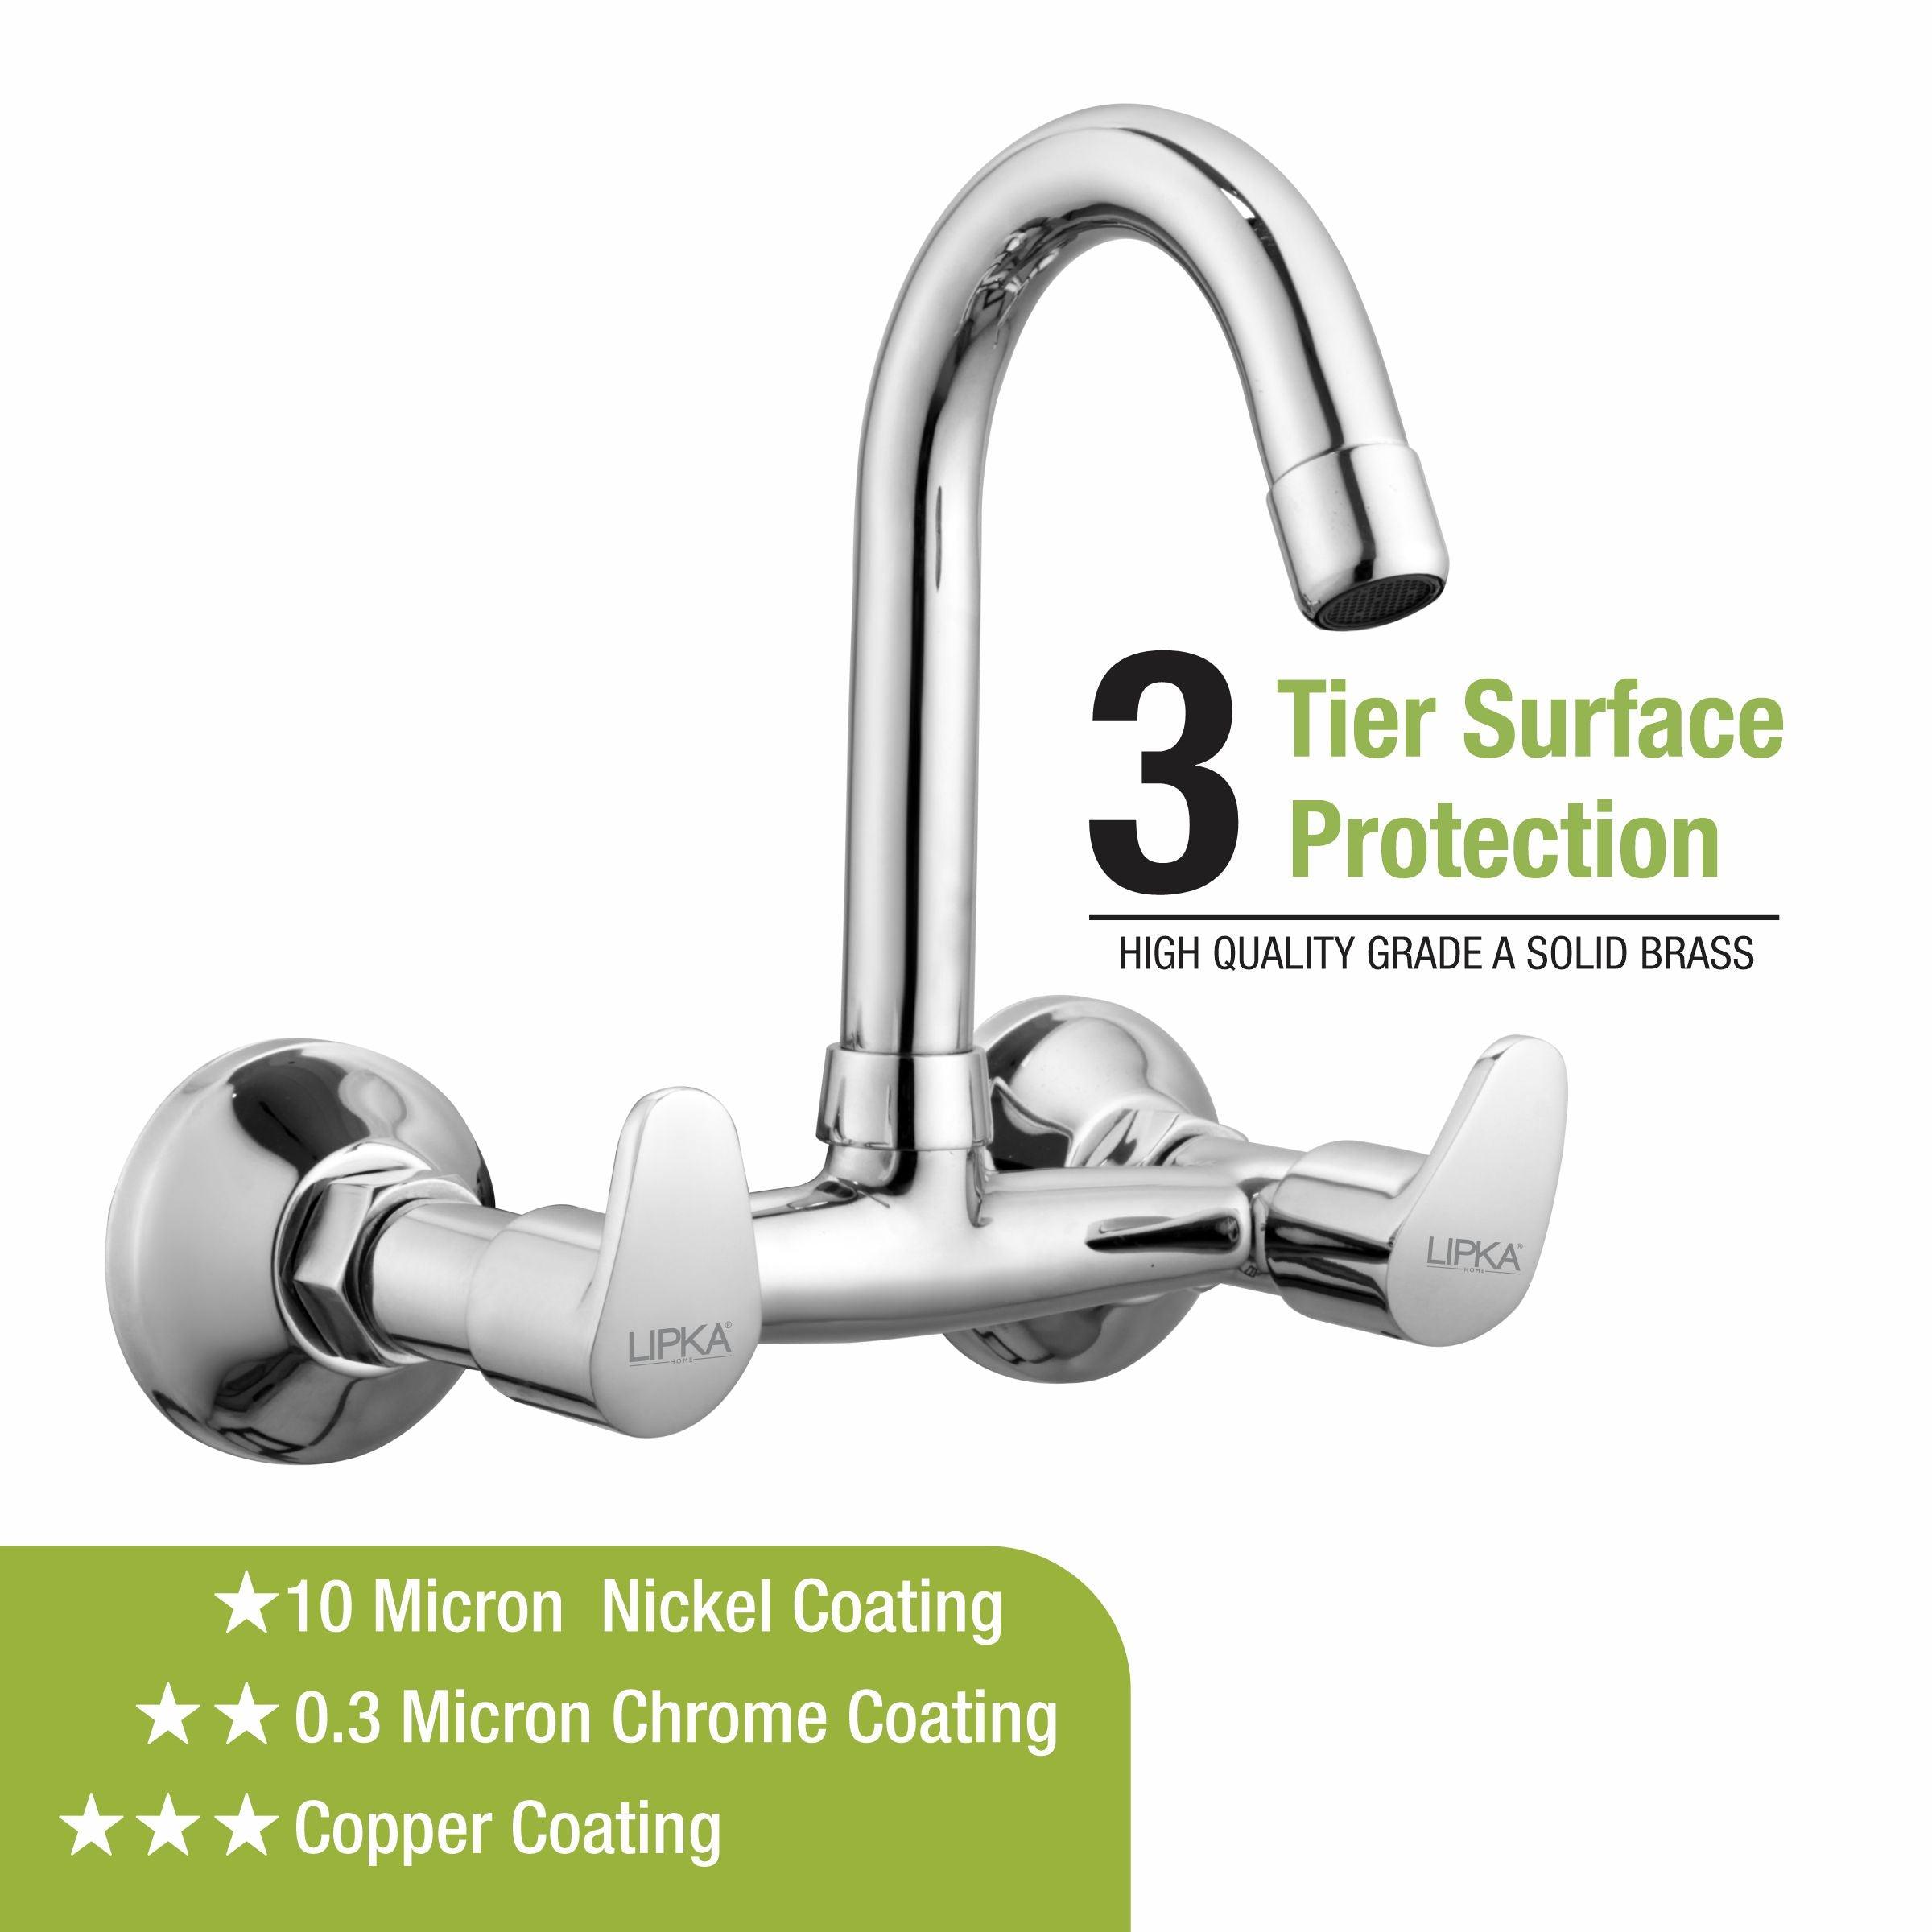 Apple Sink Mixer Brass Faucet with Round Swivel Spout (12 Inches) - LIPKA - Lipka Home